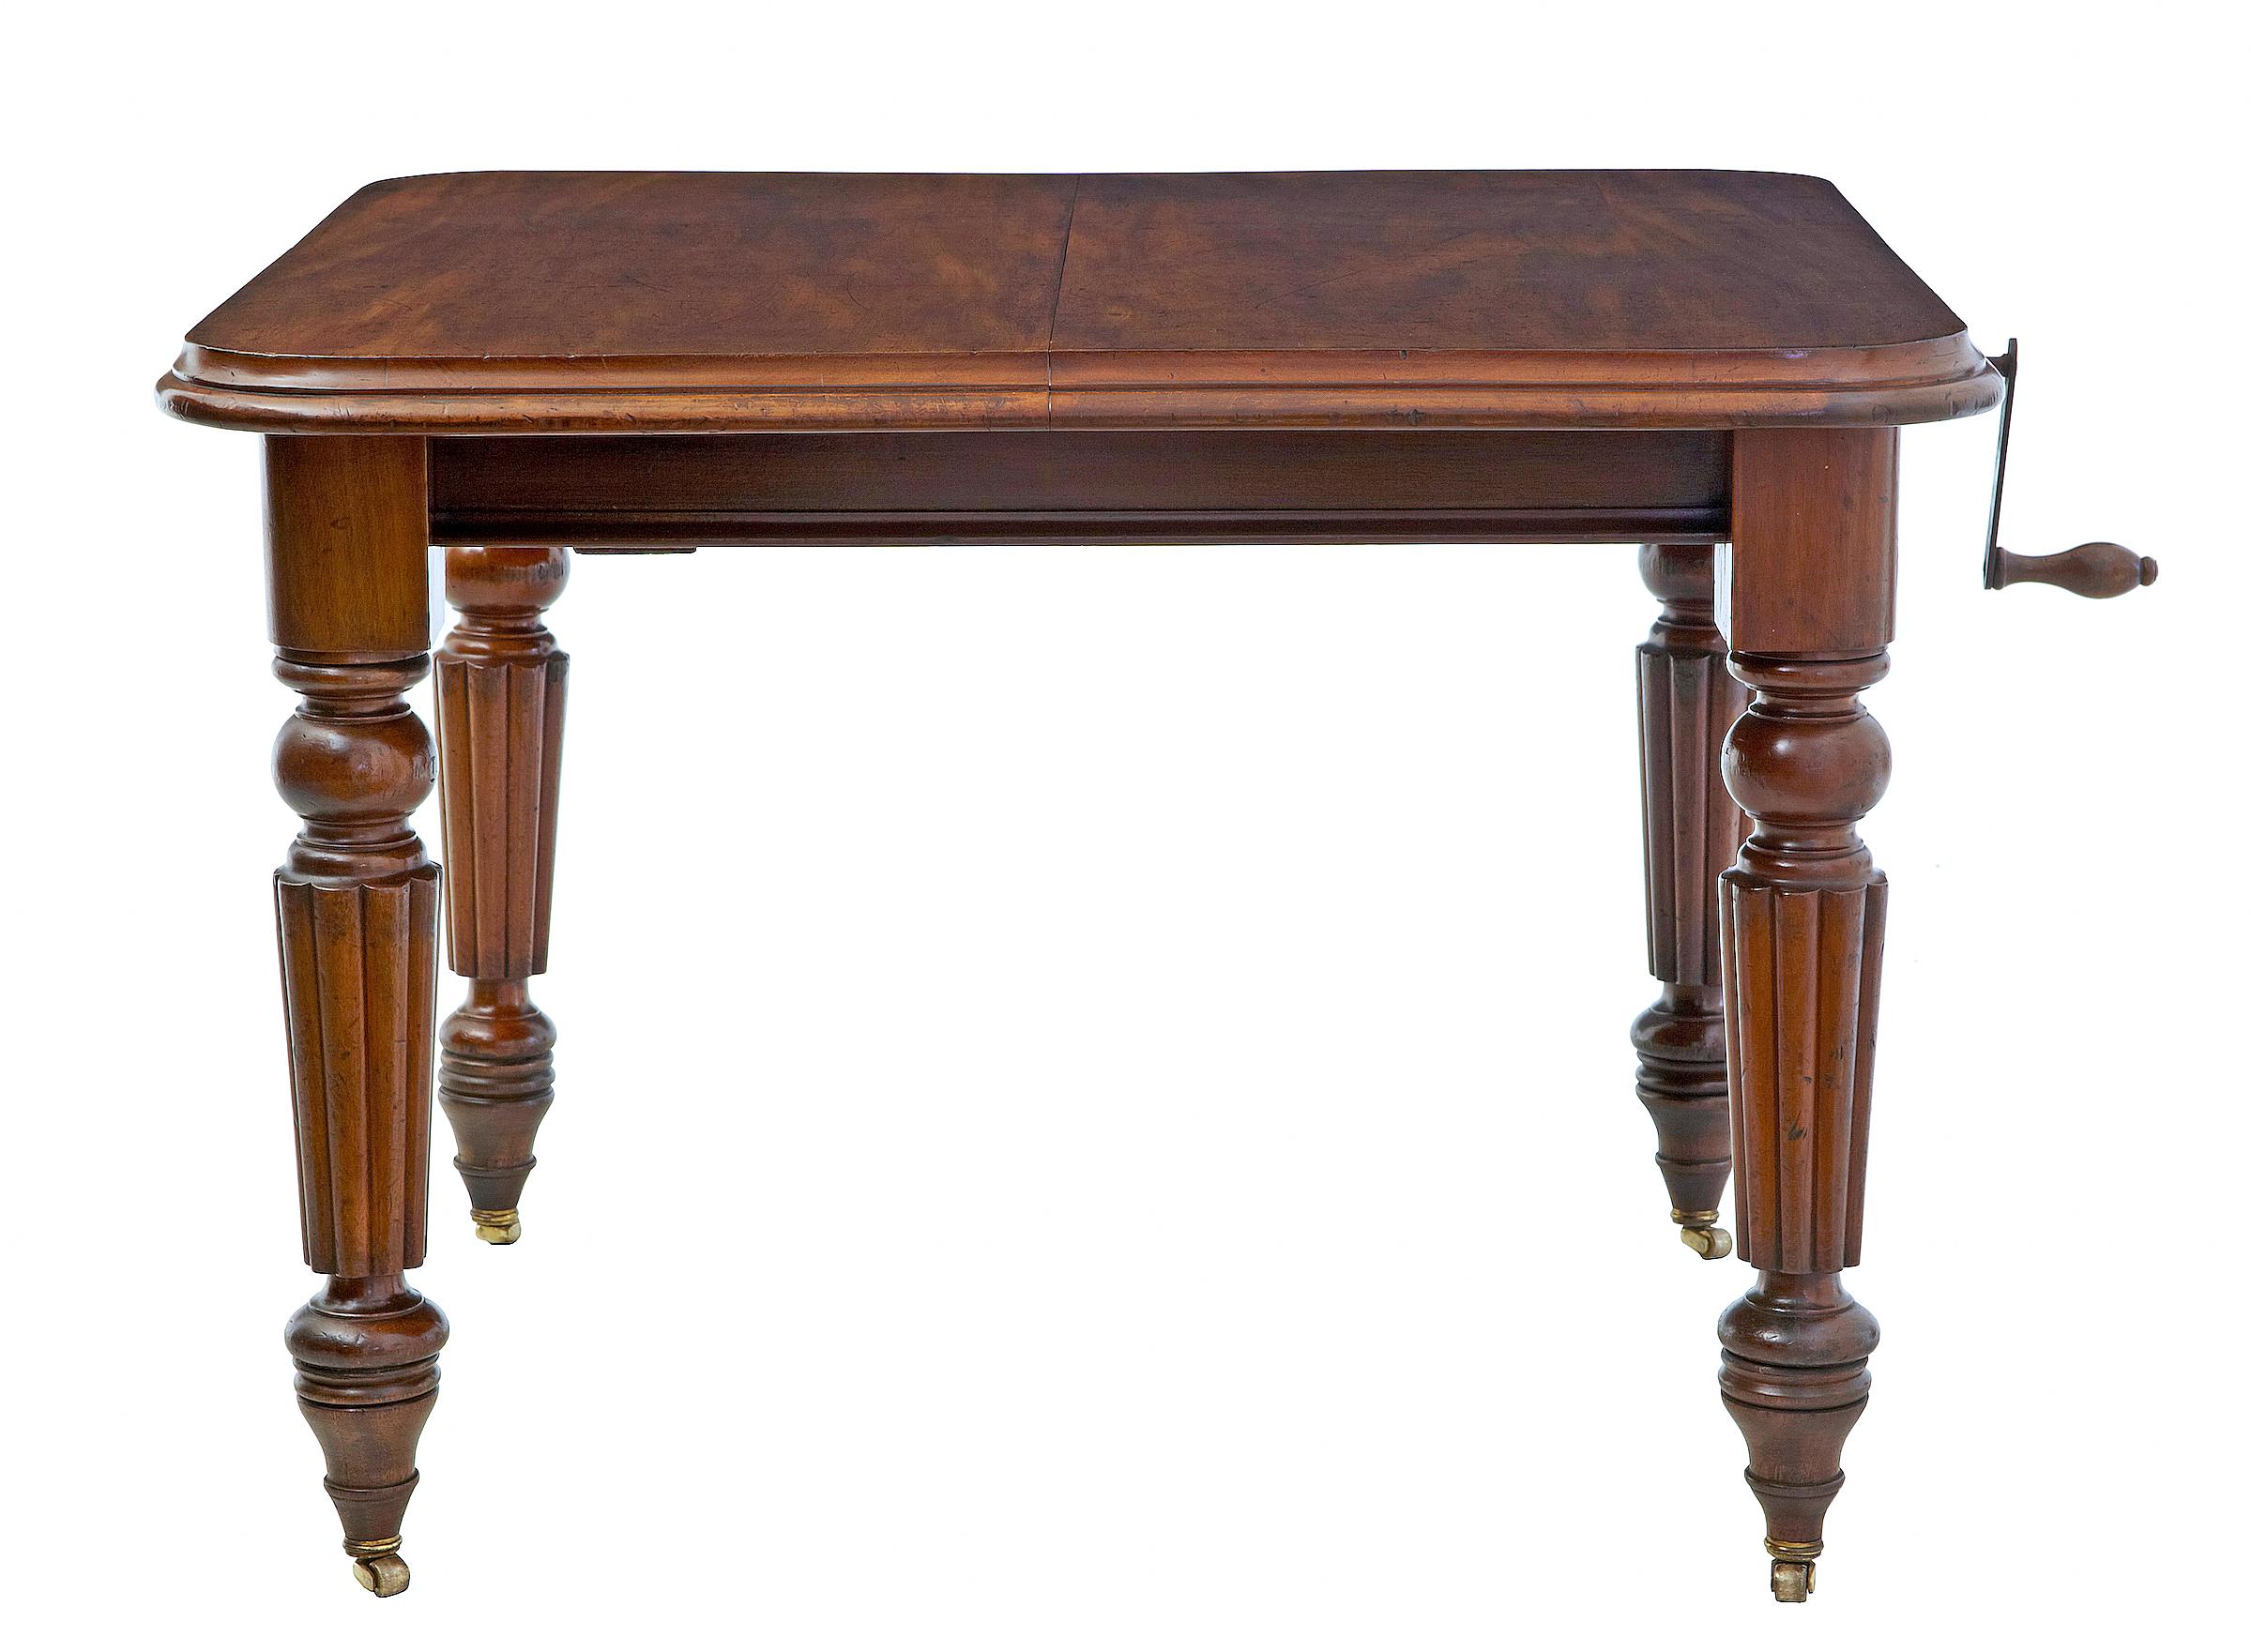 19th century Victorian mahogany extending dining table, circa 1880.

Good quality high Victorian dining table made from mahogany, table extends if required to add 1 extra leaf, making it capable of seating a comfortable 6.

Standing on 4 Gillow